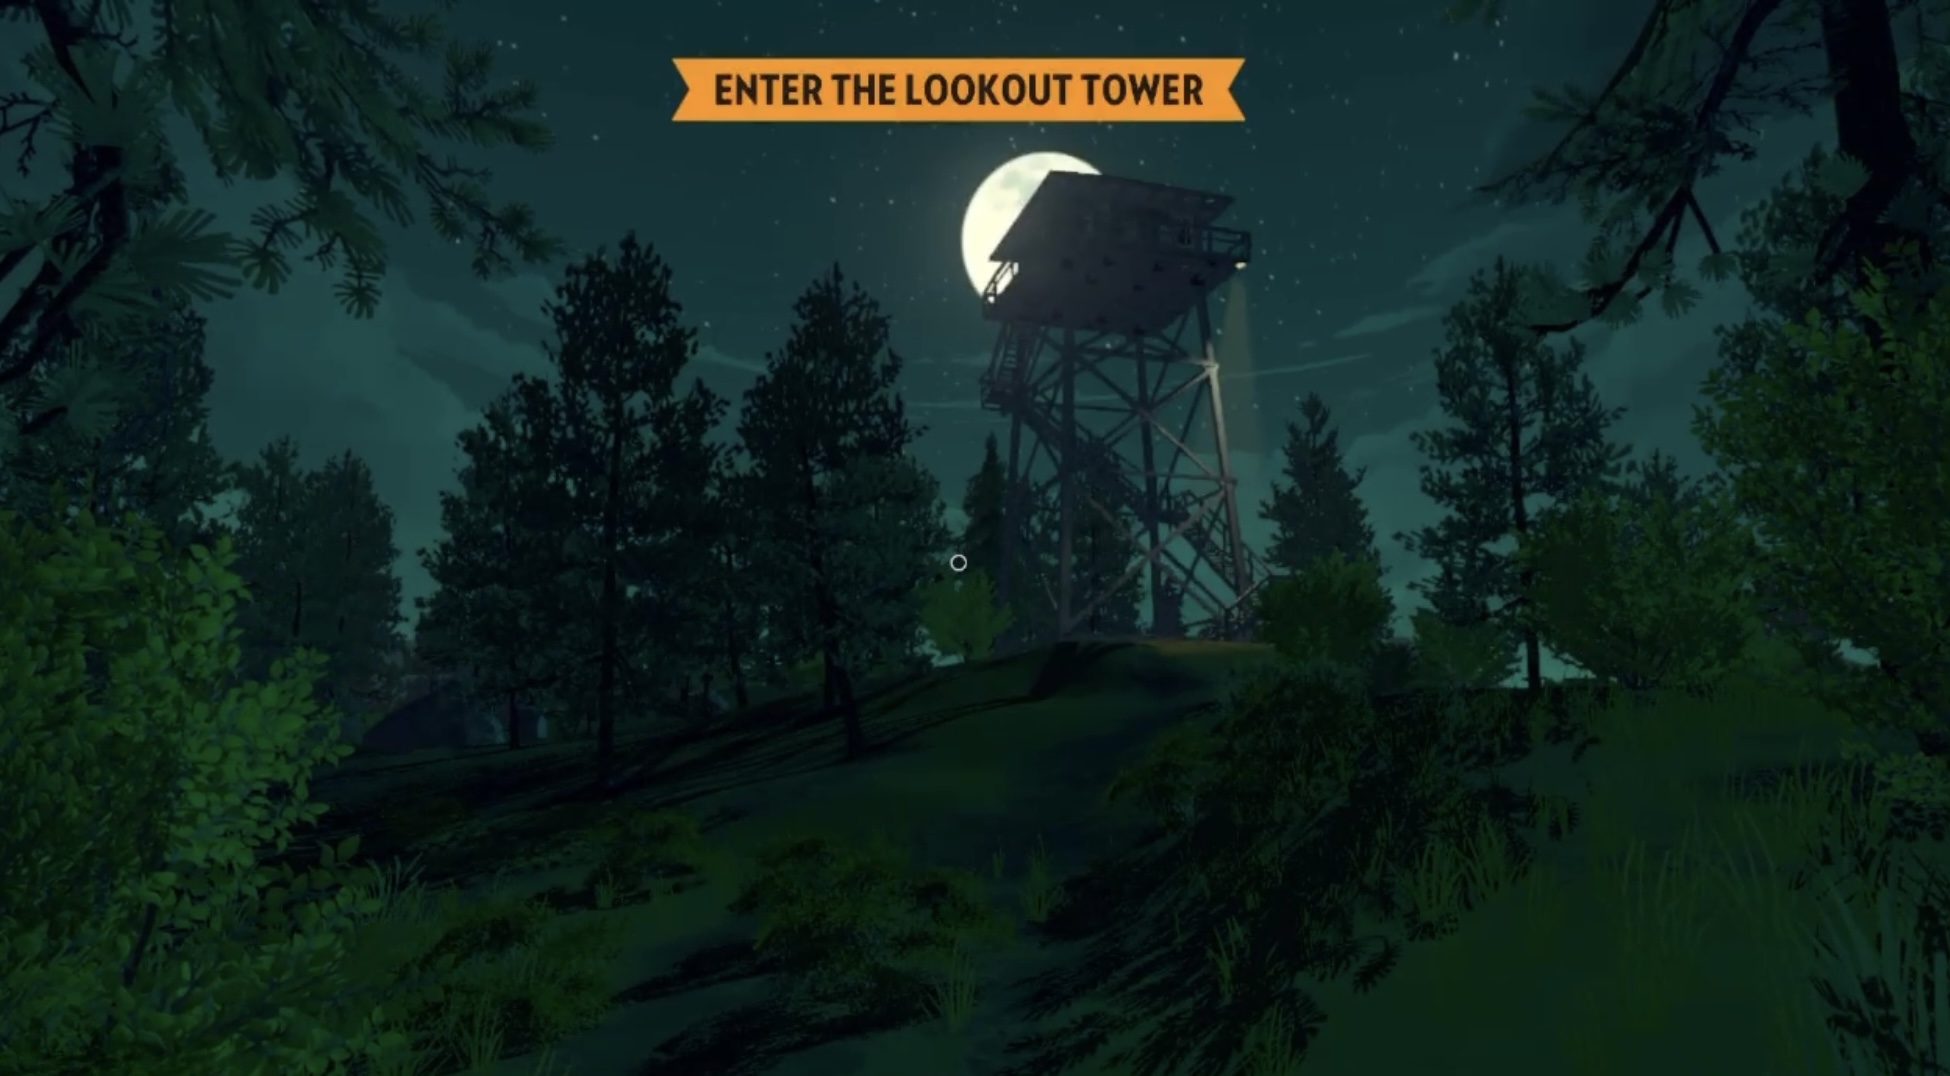 silhouette of a forest and lookout tower against a moon in the background